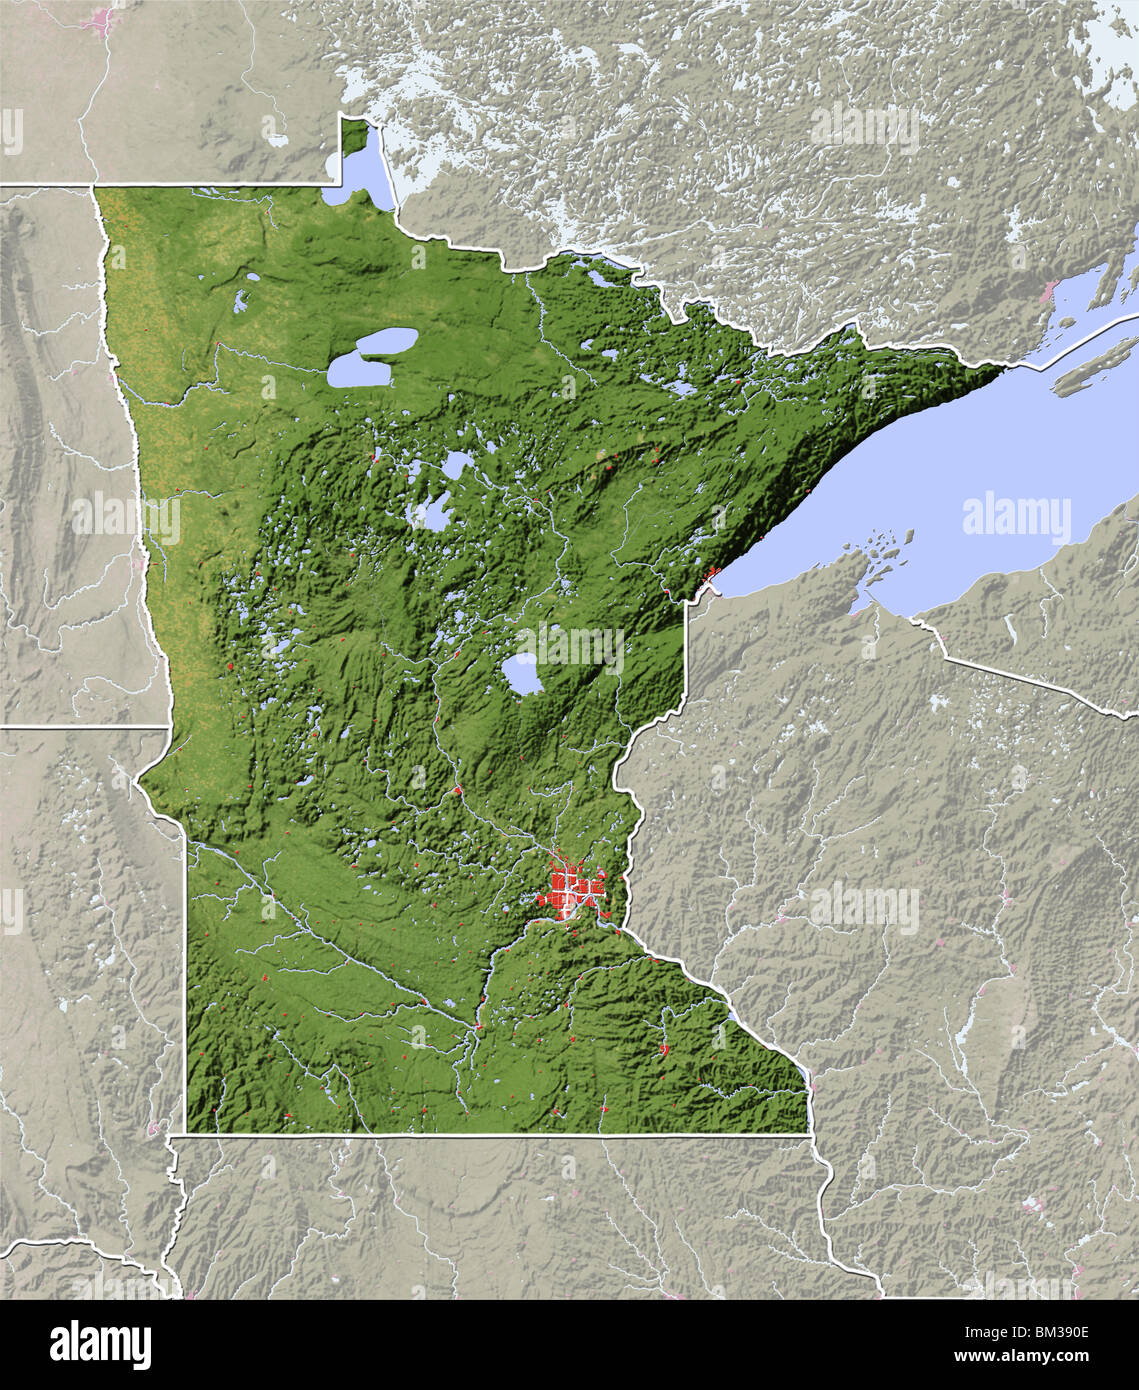 Minnesota, shaded relief map. Stock Photo